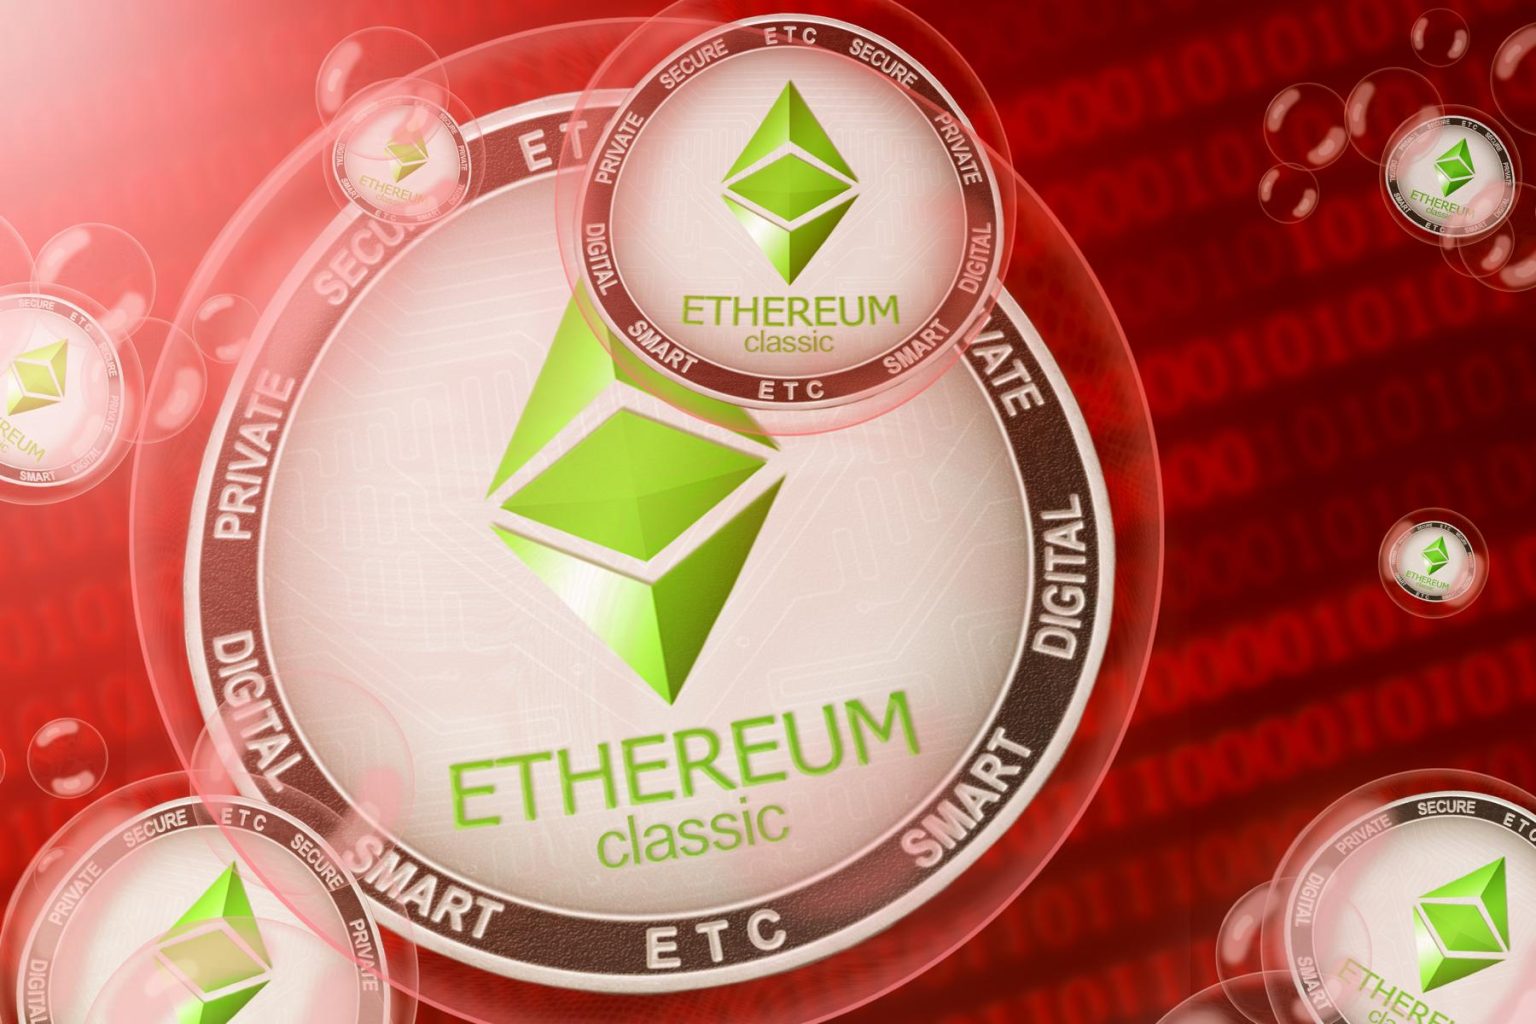 Ethereum-Classic-ETC-coin-with-red-background